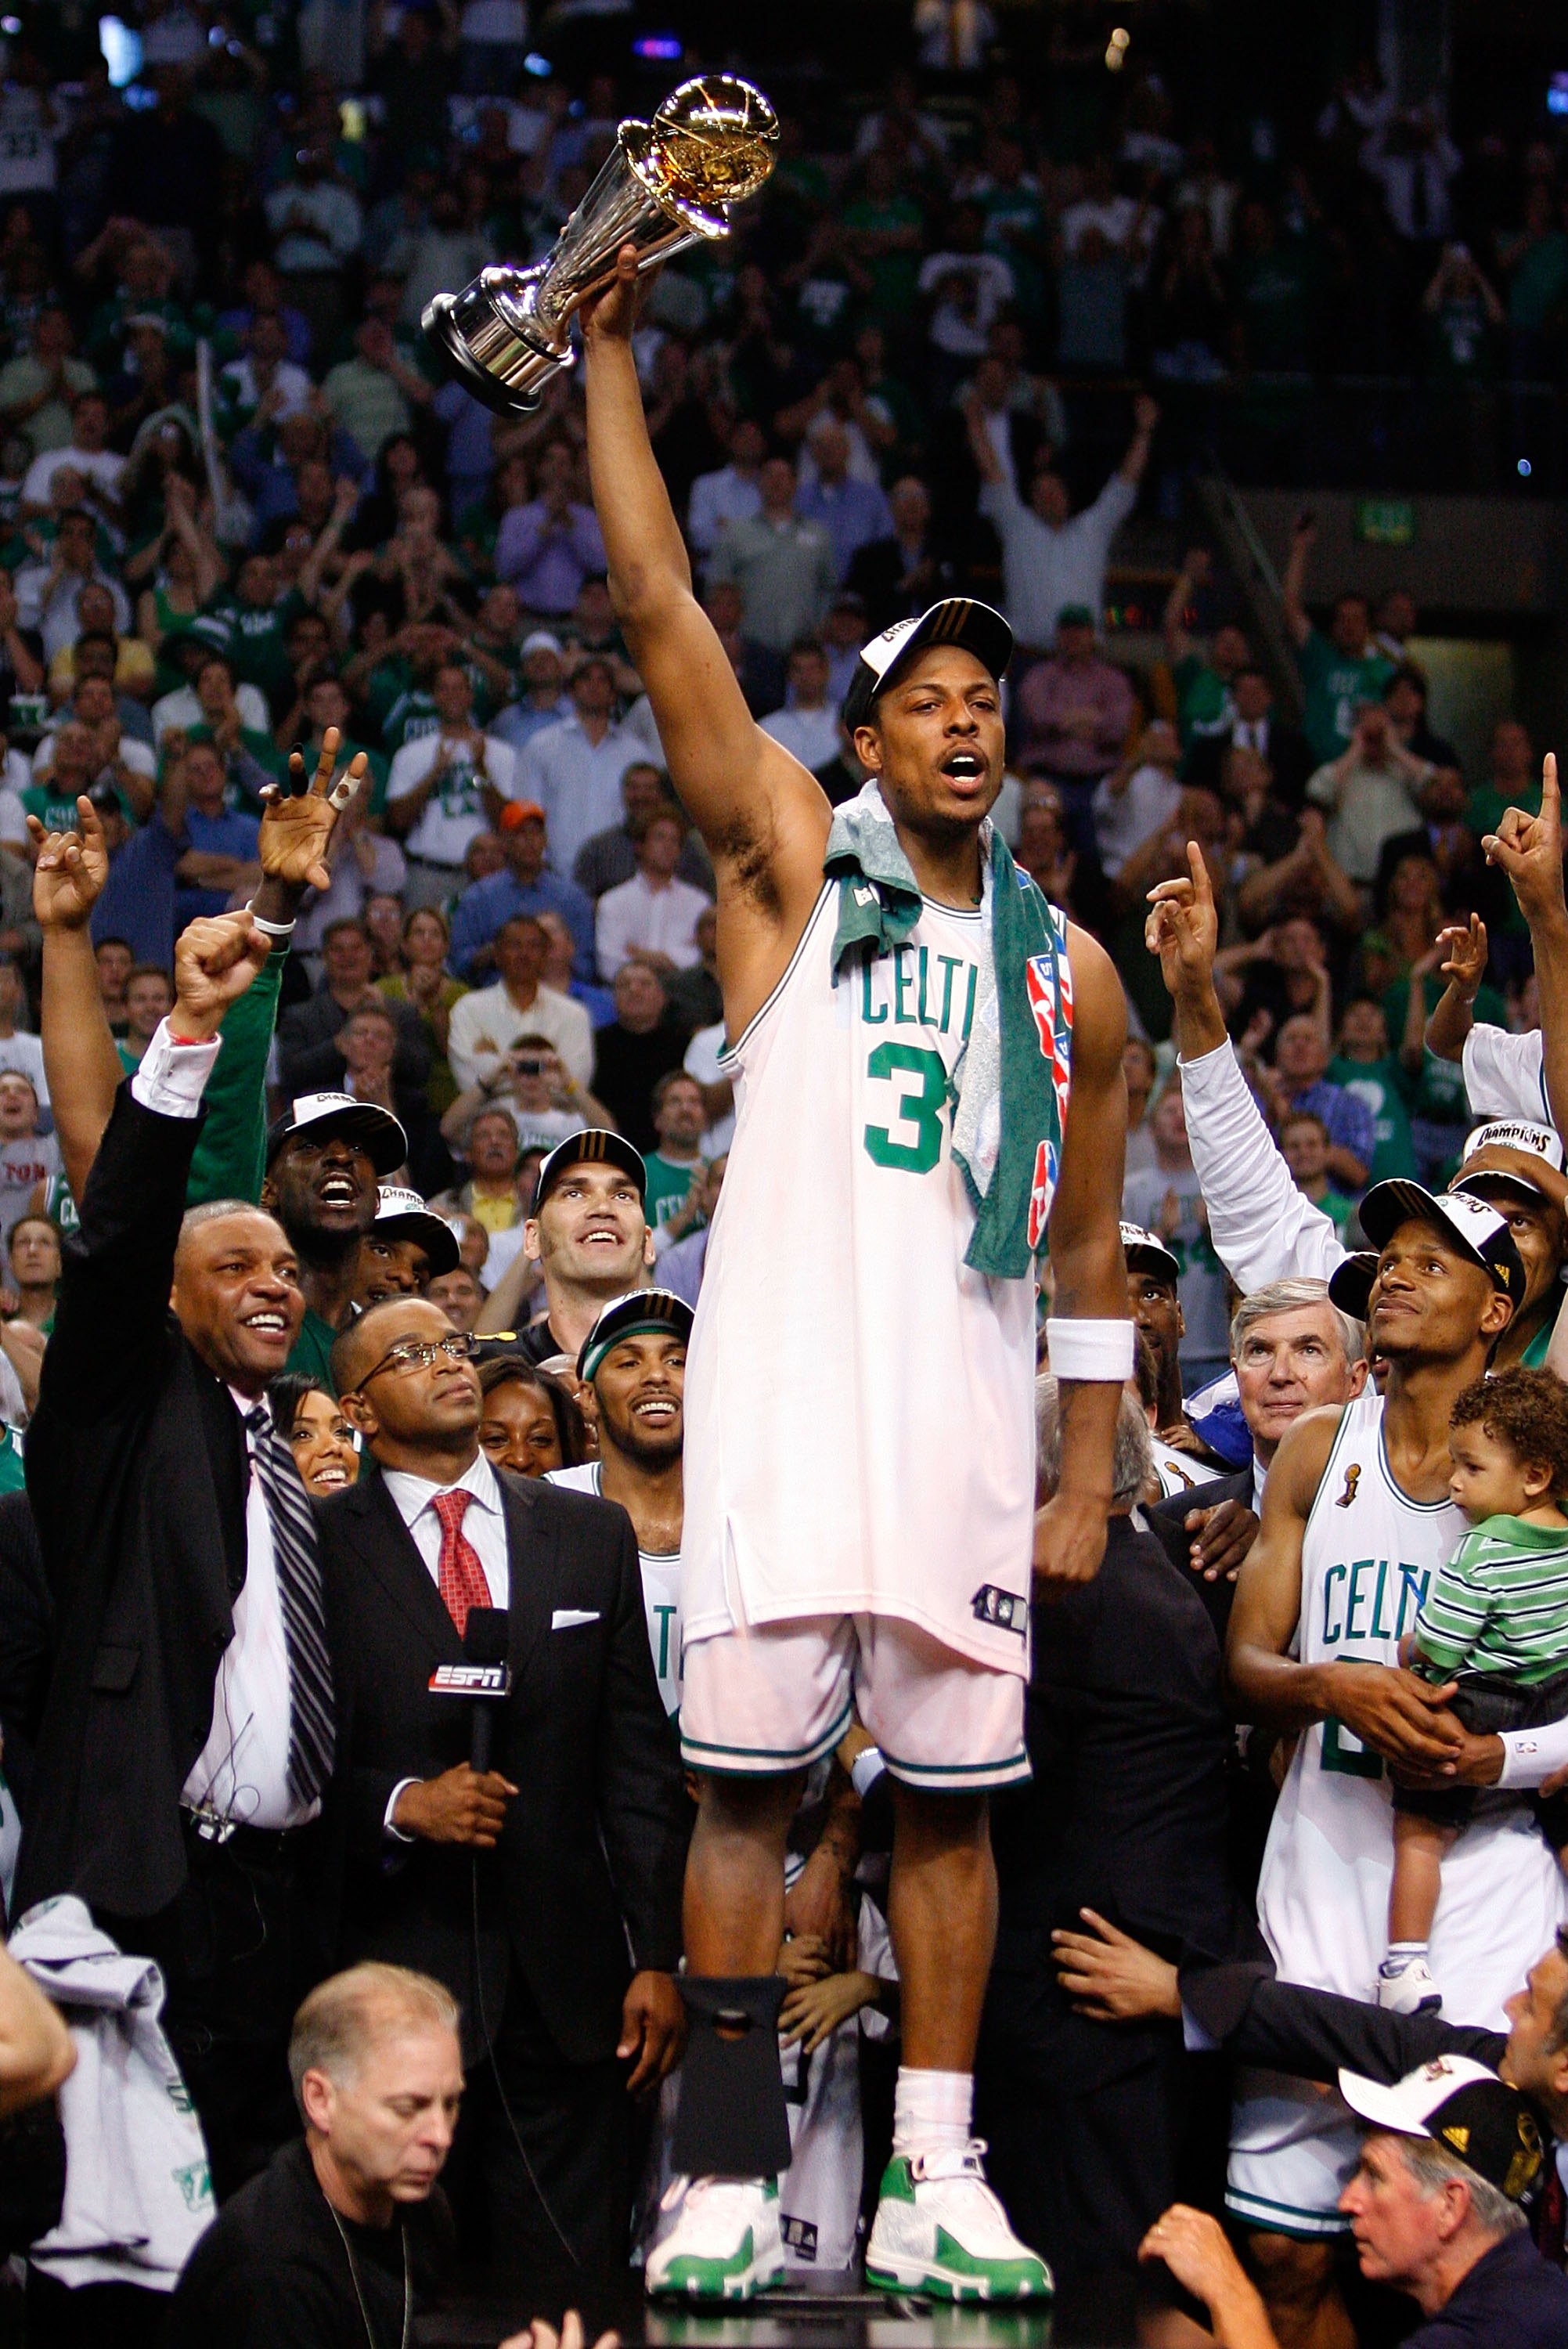 BOSTON - JUNE 17:  Paul Pierce #34 of the Boston Celtics celebrates with the Finals MVP trophy at the end of Game Six of the 2008 NBA Finals against the Los Angeles Lakers on June 17, 2008 at TD Banknorth Garden in Boston, Massachusetts. The Celtics defea